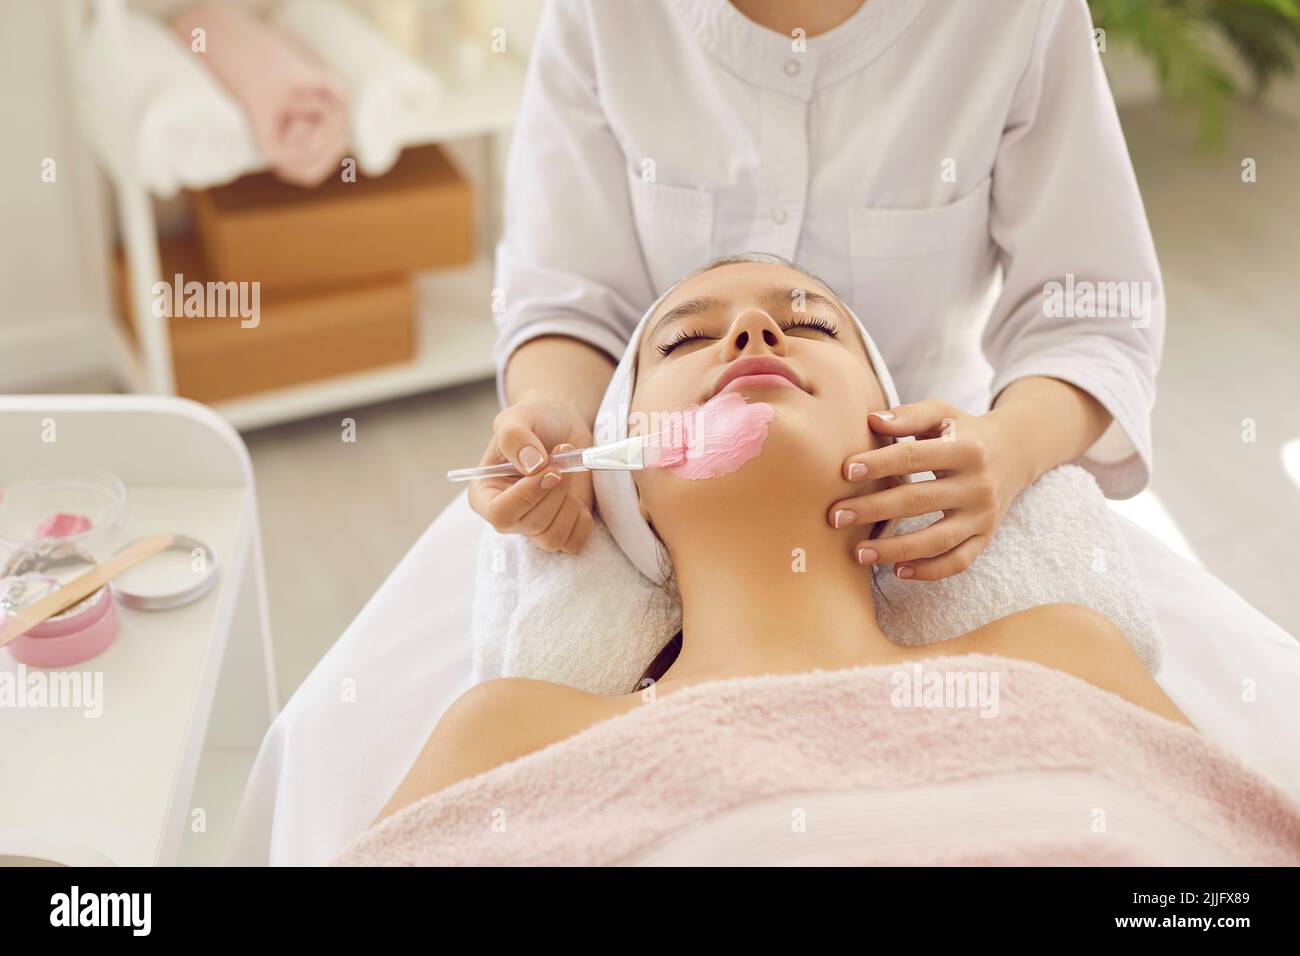 Woman enjoying clay mask while getting facial treatment in spa salon or beauty parlor Stock Photo